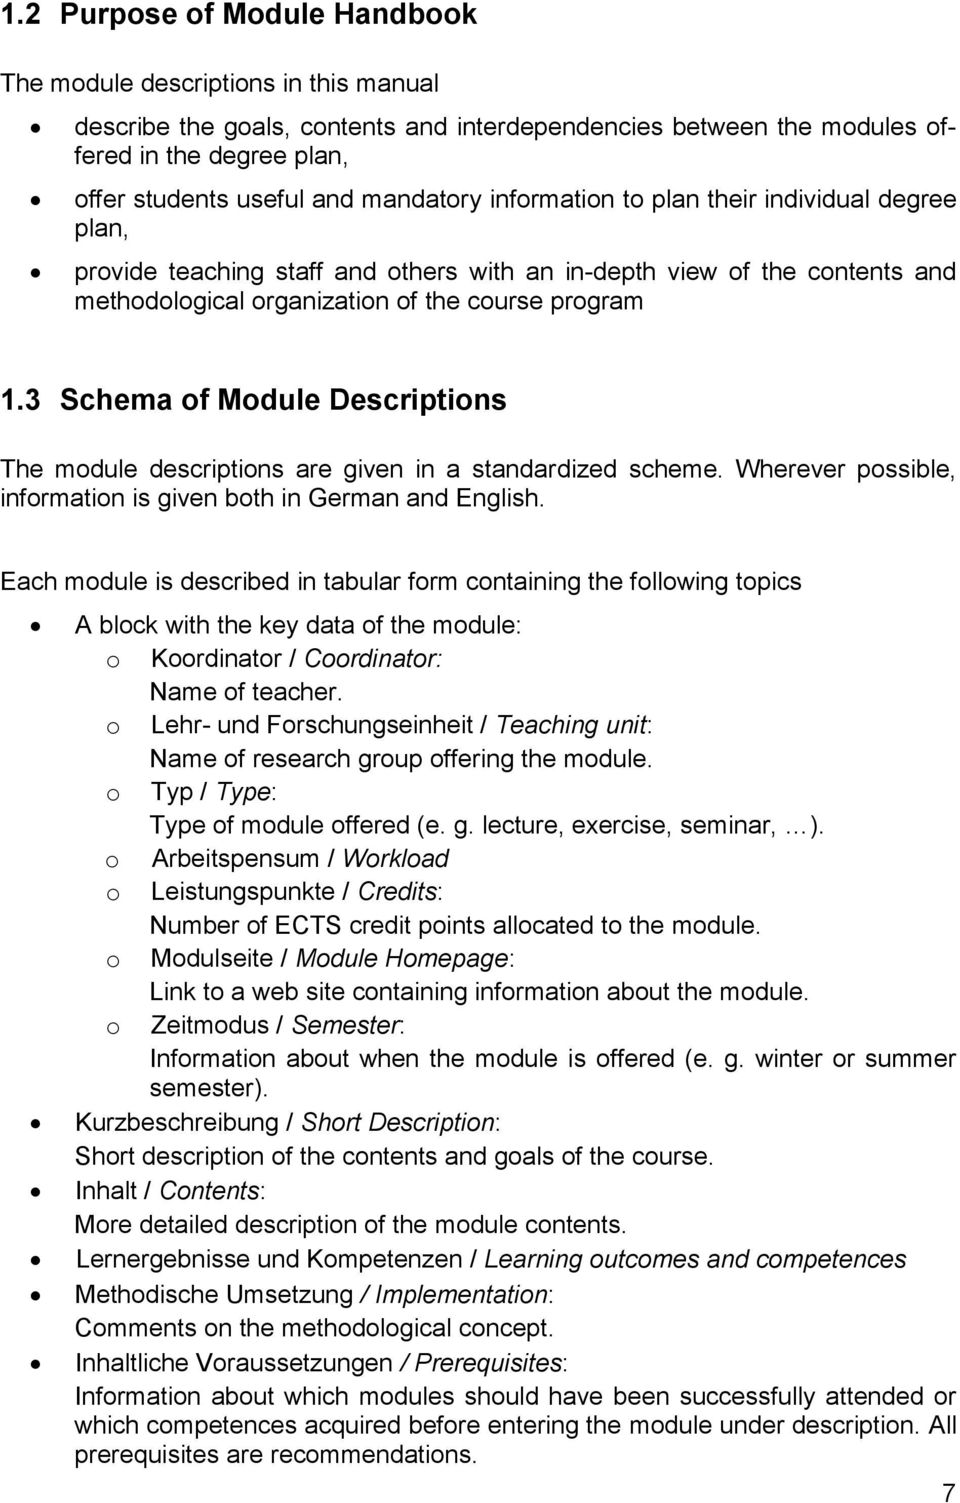 3 Schema of Module Descriptions The module descriptions are given in a standardized scheme. Wherever possible, information is given both in German and English.